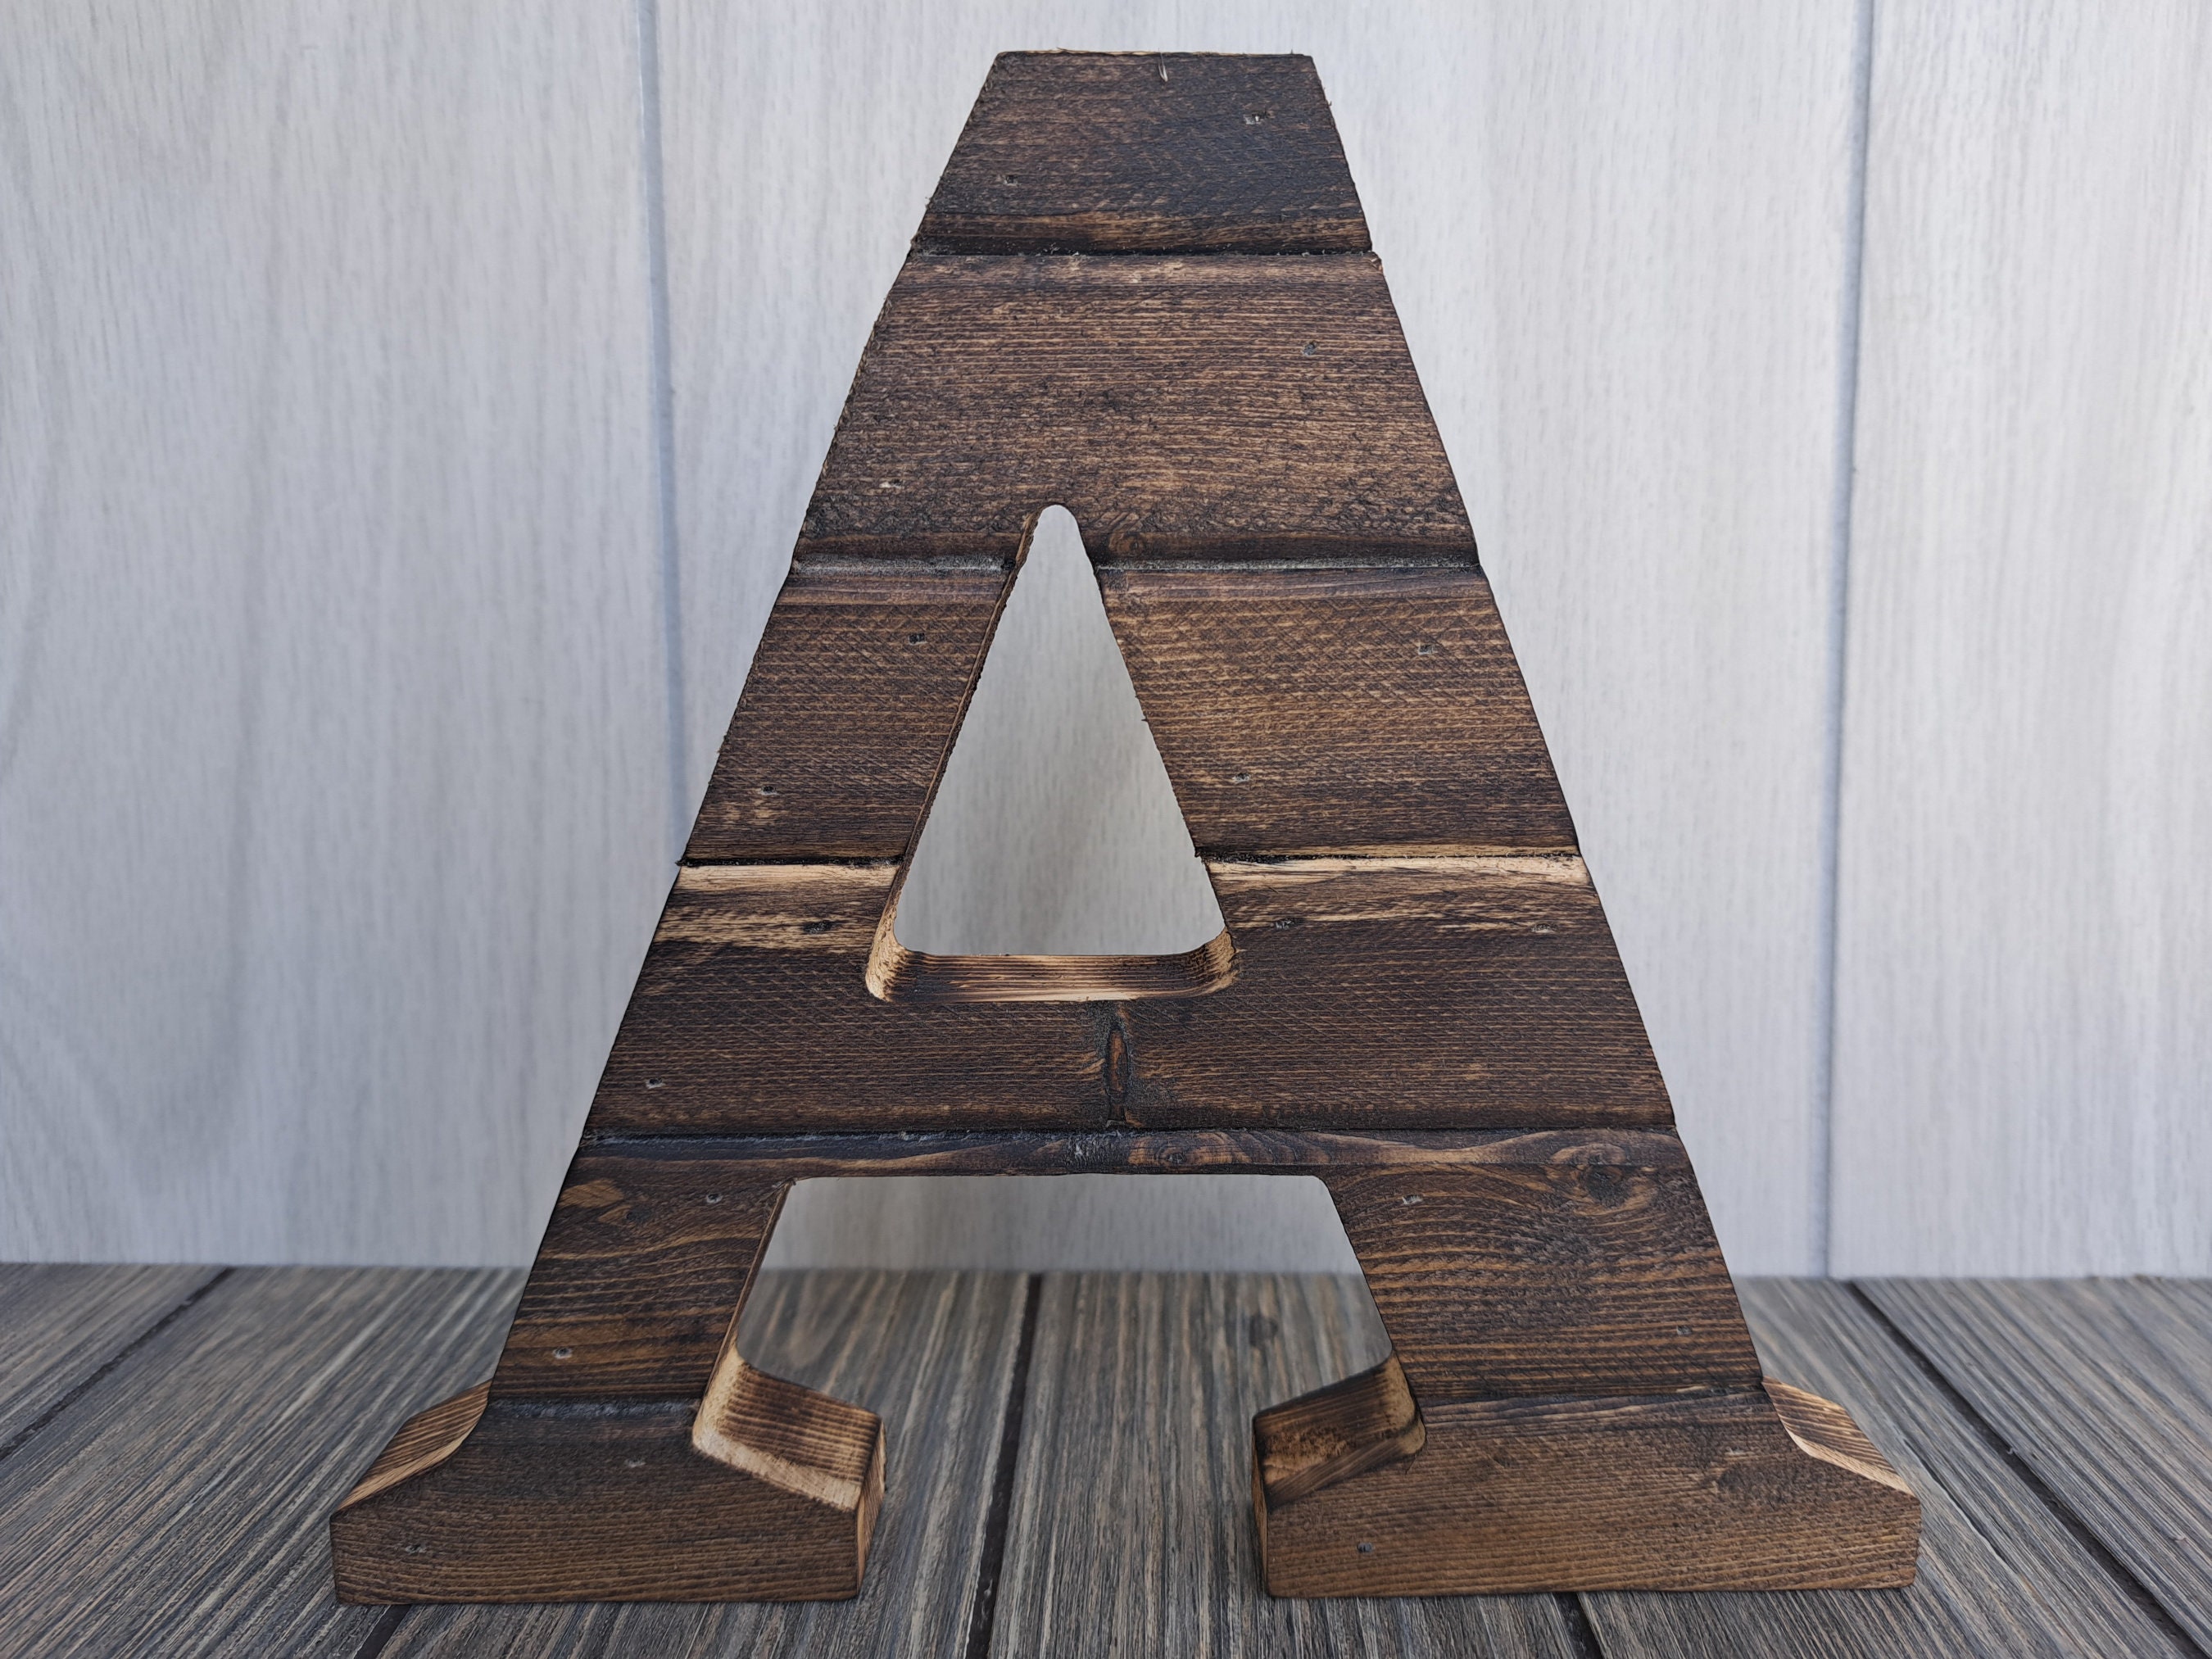  Wood Letters 4.3 Inch, White Unfinished Wood Letters for Graft,  Wooden Letters for Wall Decor, Standing Letters for Bedroom, Home,  Birthday, Party, DIY Graft (&)